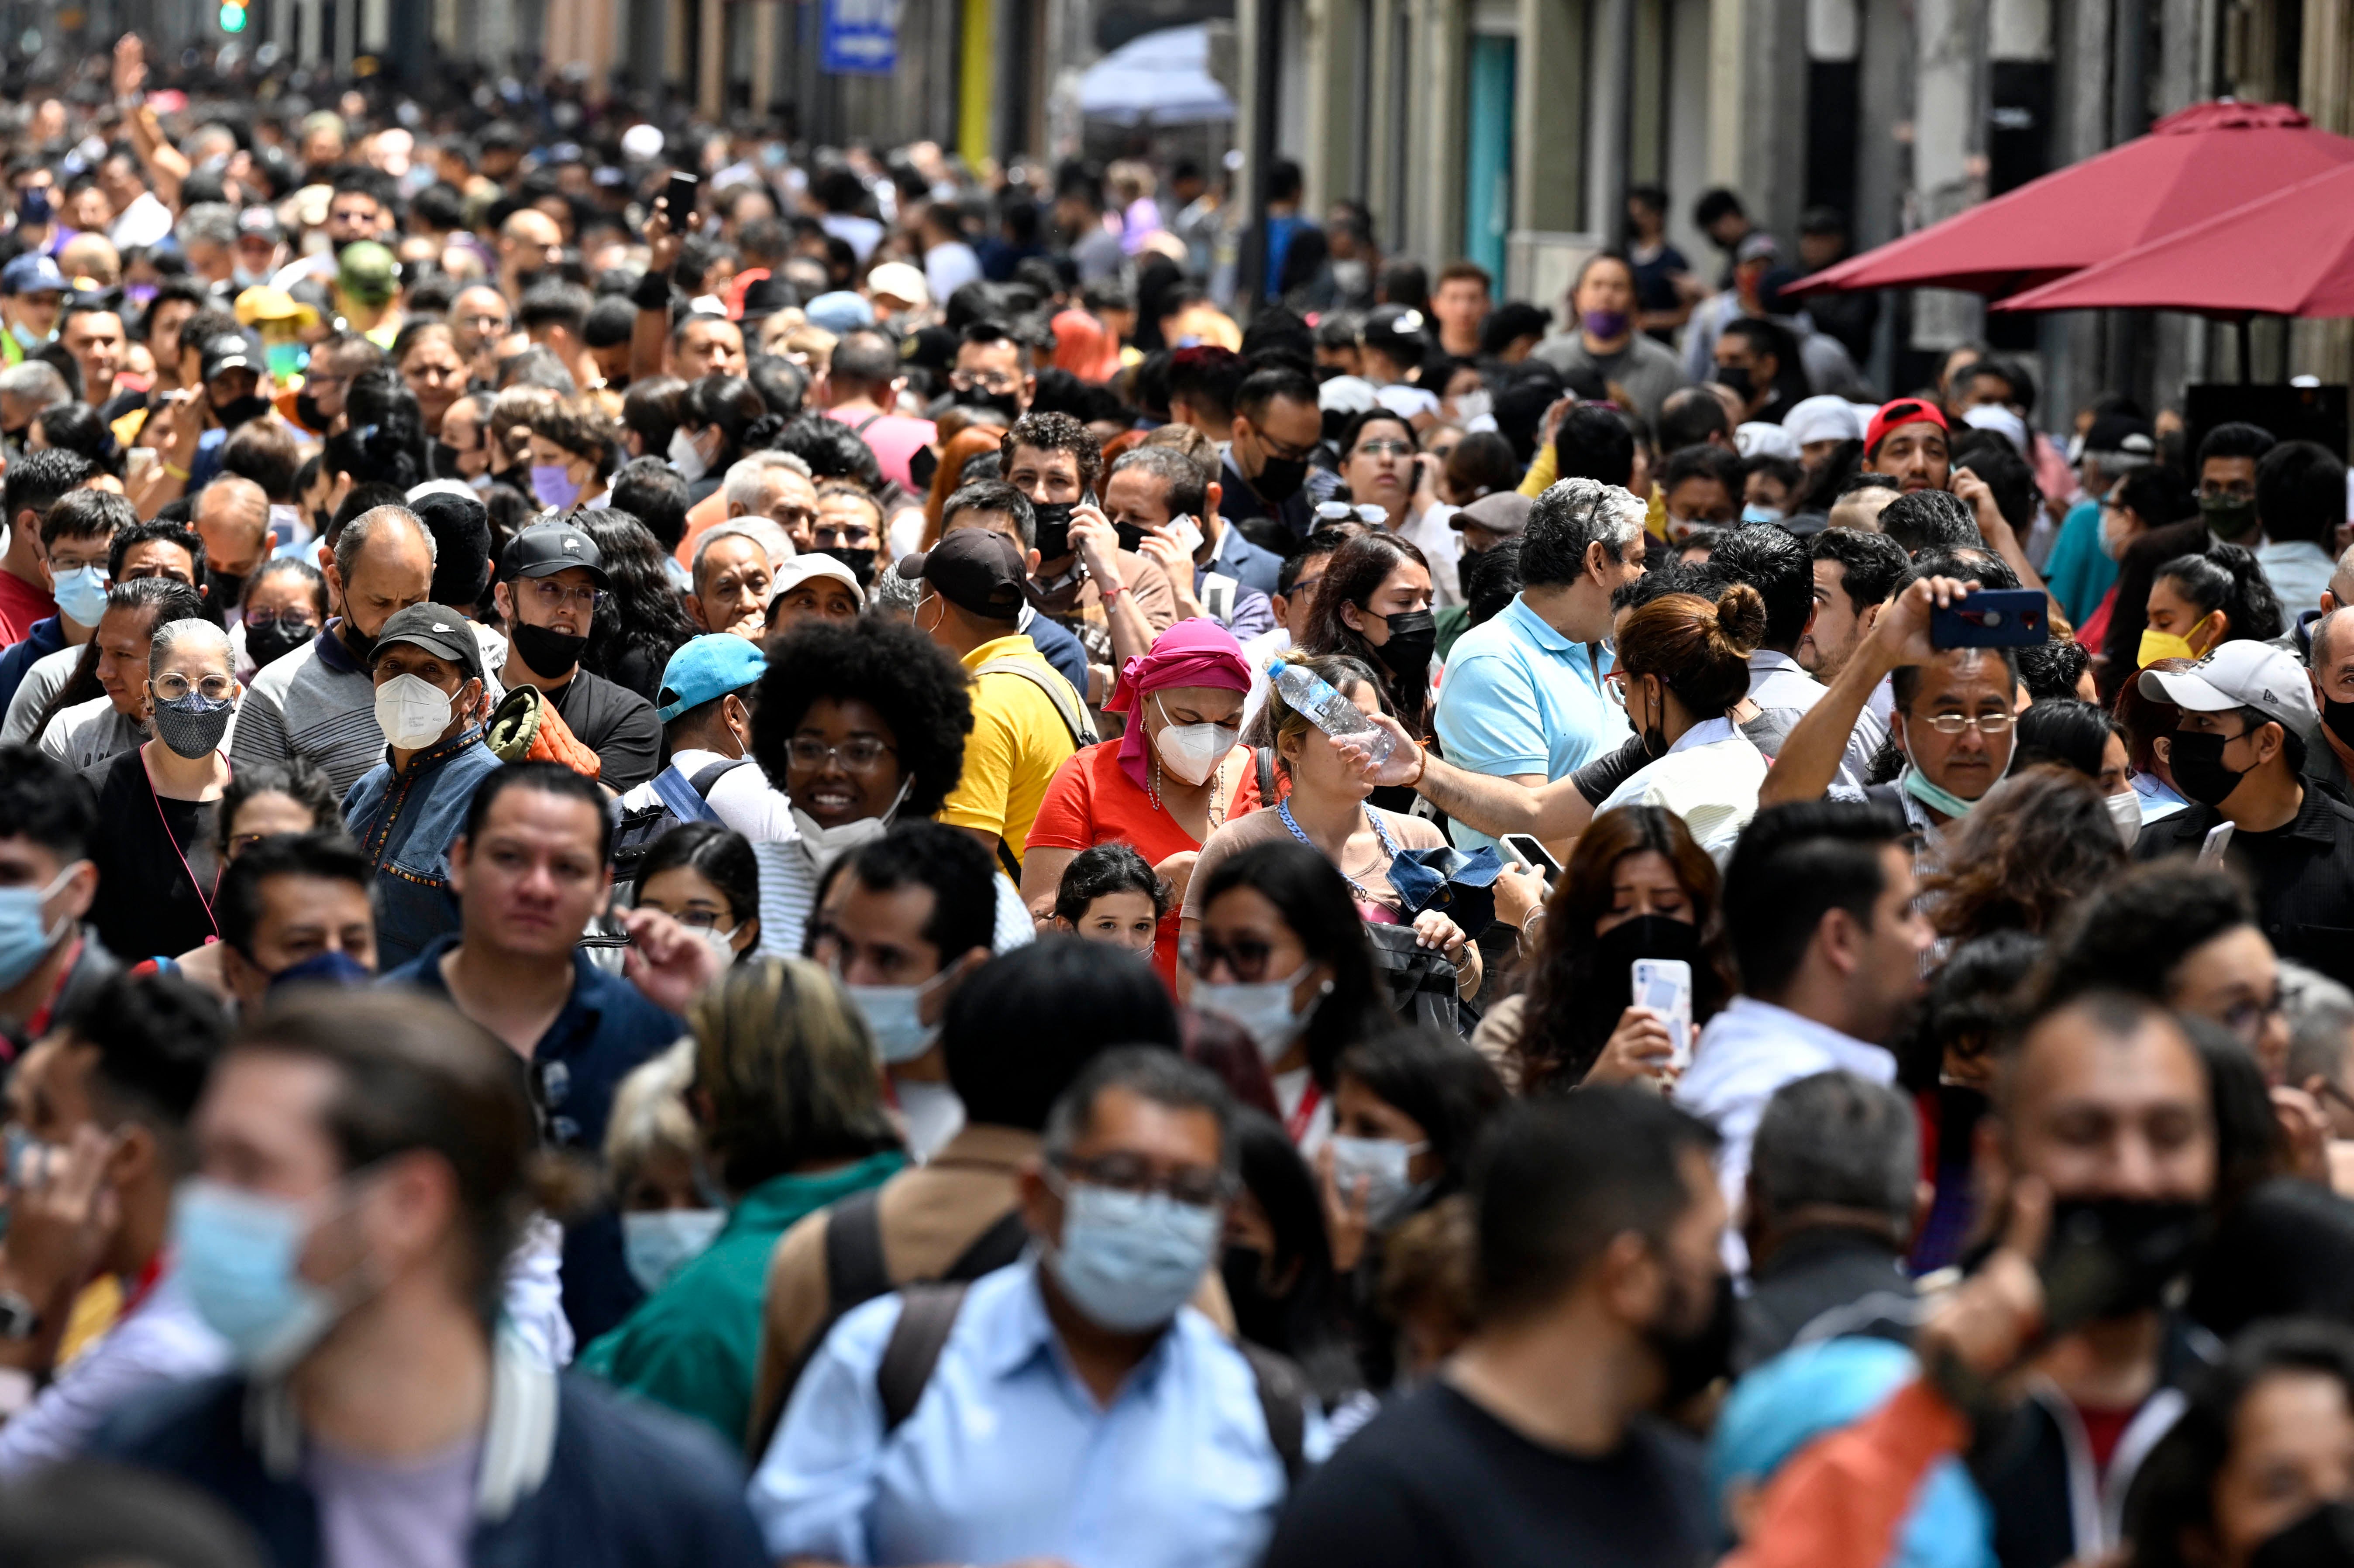 People are seen in the streets after an earthquake in Mexico City on September 19, 2022